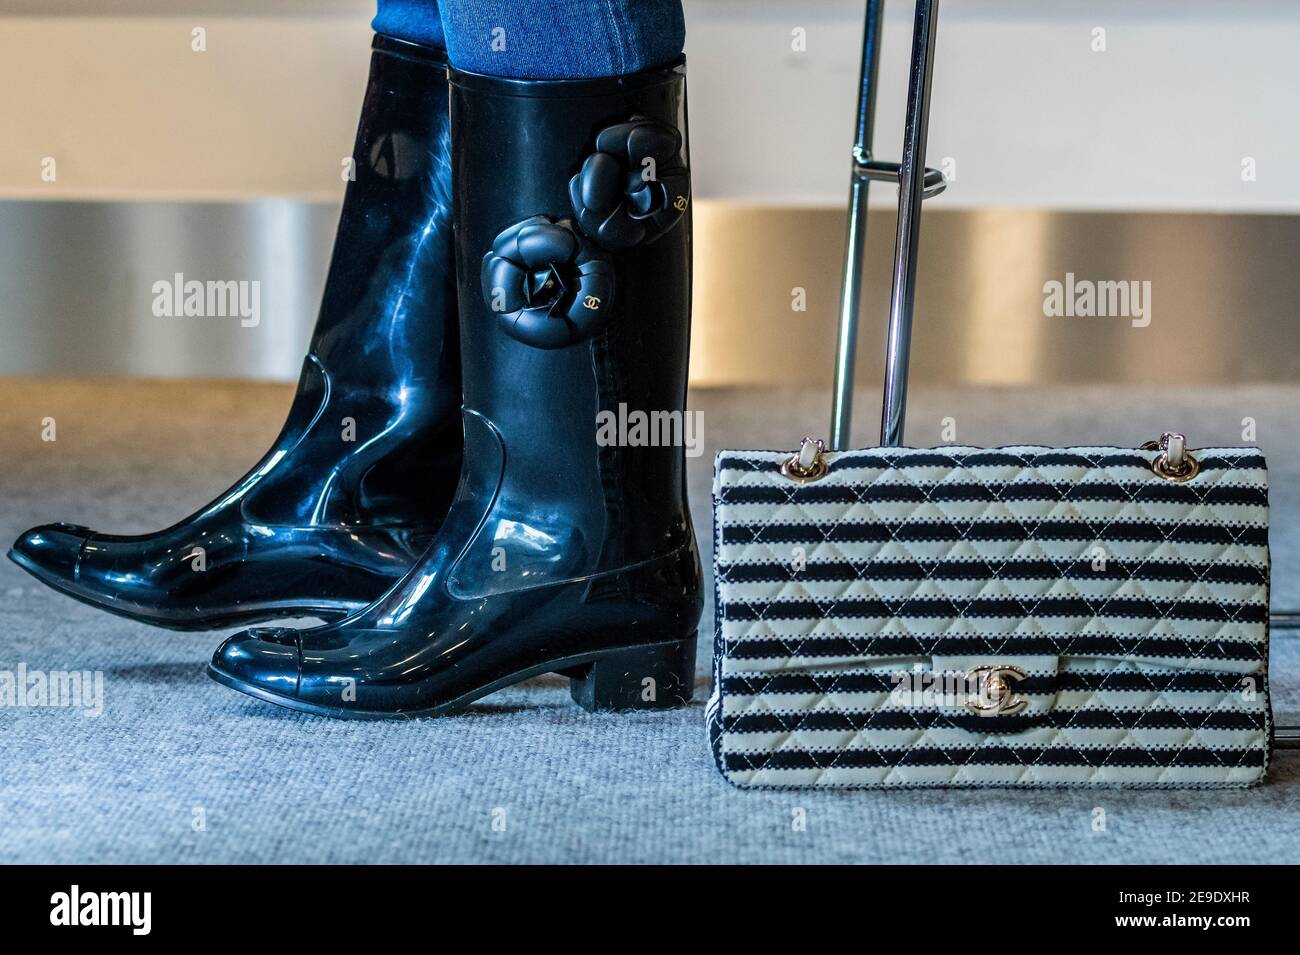 CHANEL Women's Boots for Sale 